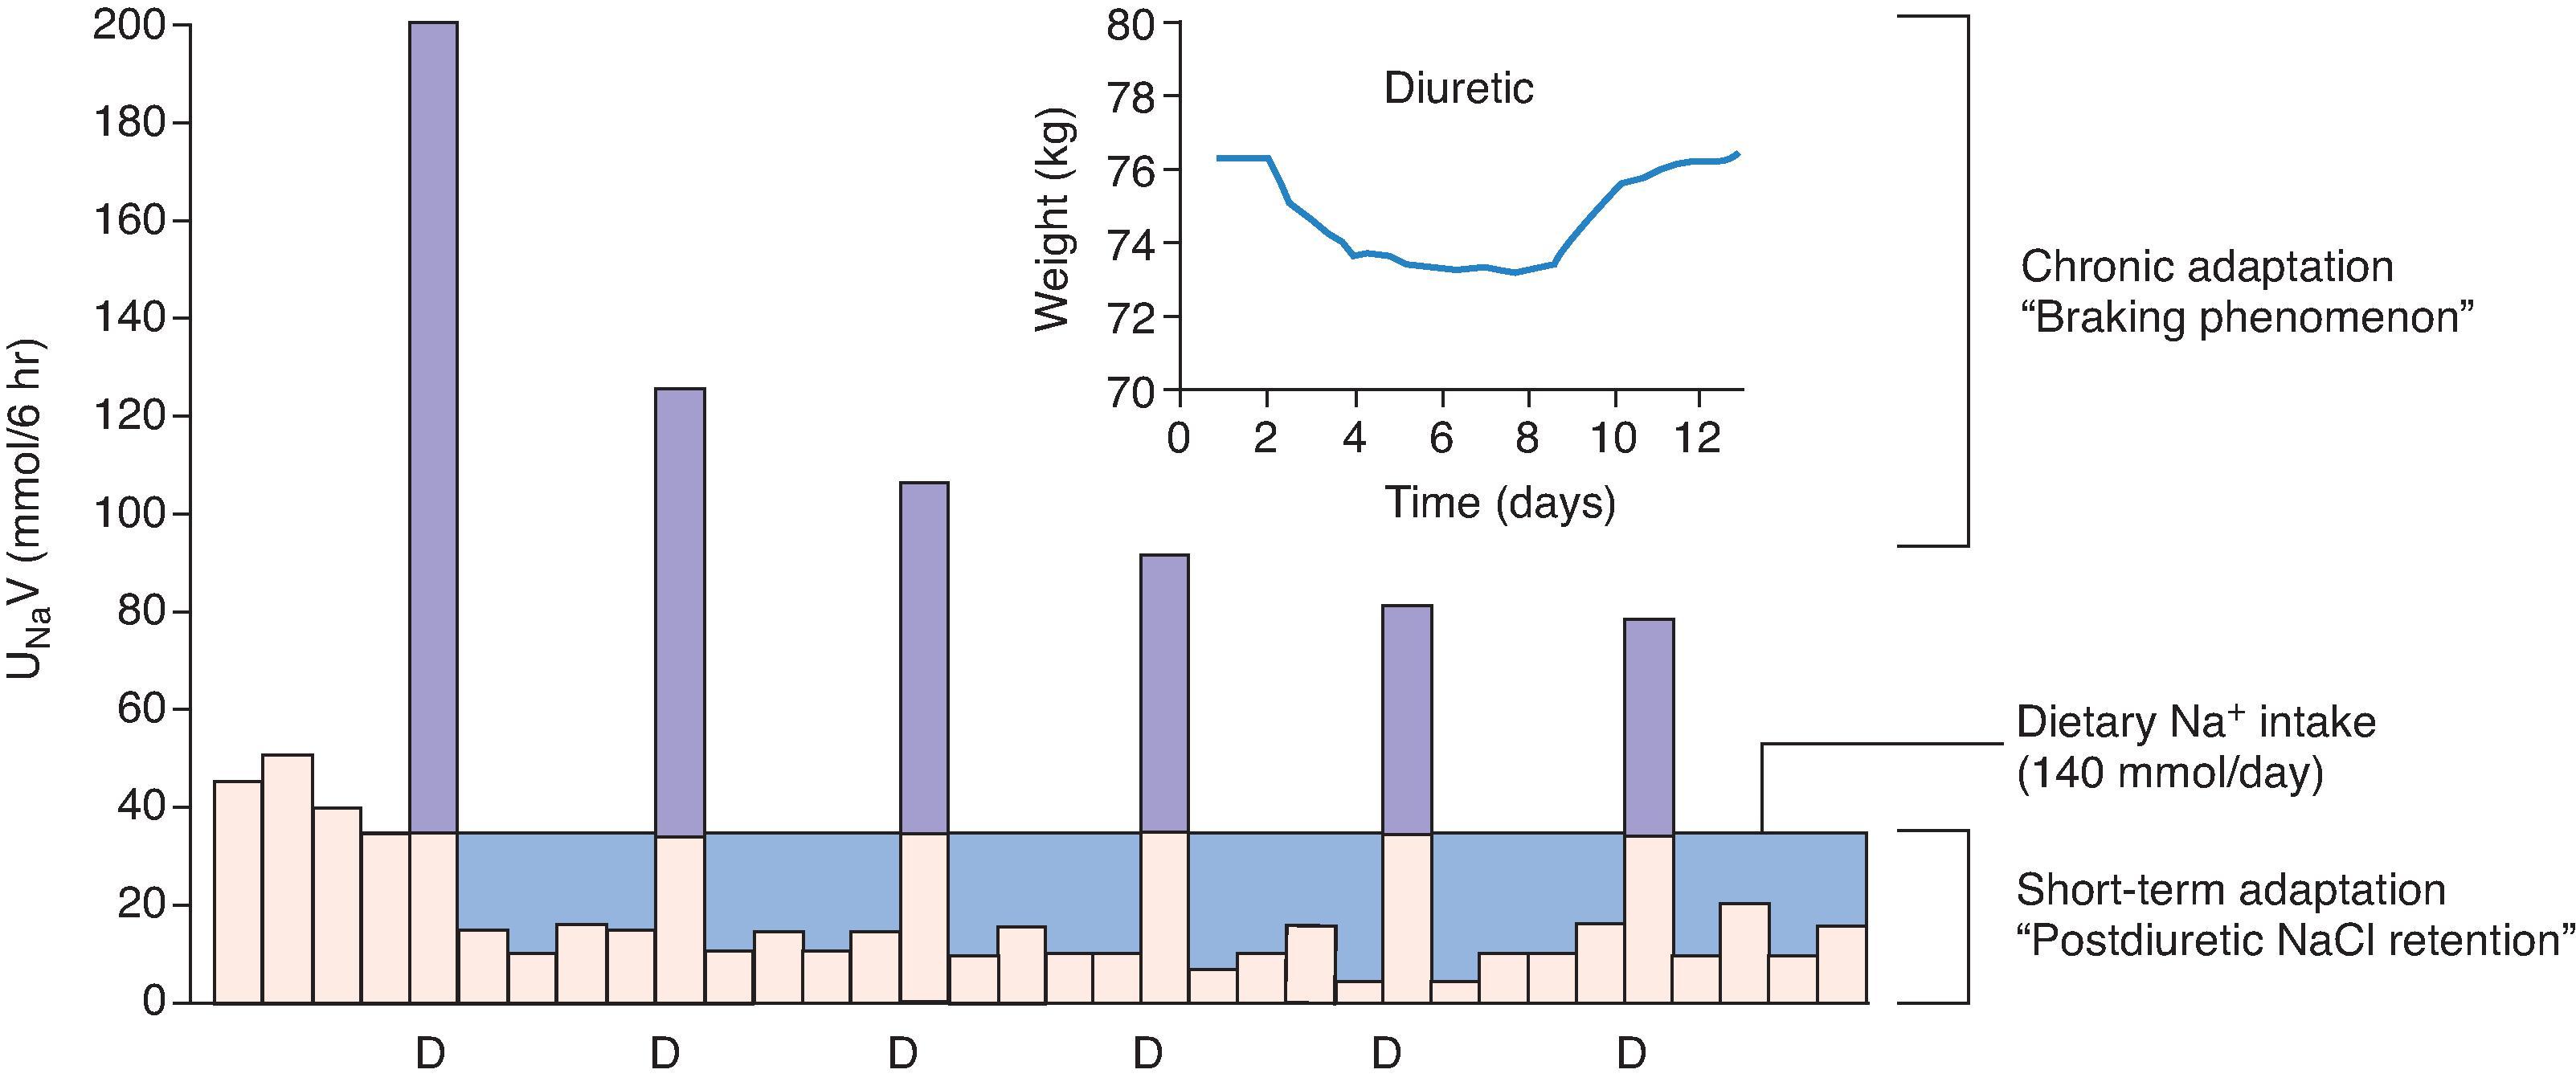 Fig. 9.3, Effect of a loop diuretic on urinary sodium excretion. Each bar represents a 6-hour time interval. Purple bars indicate periods during which urinary sodium excretion (U Na V) exceeds that of dietary intake. Blue areas indicate periods of postdiuretic sodium retention, during which dietary sodium intake exceeds urinary sodium excretion. The horizontal black line indicates dietary sodium intake per 24-hour period. Changes in the magnitude of the natriuretic response over several days are reflective of the “braking phenomenon.” Inset shows the effect of diuretics on weight (and extracellular fluid volume) during several days of diuretic administration. (Data from Wilcox CS, Mitch WE, Kelly RA, et al. Response of the kidney to furosemide: I. Effects of salt intake and renal compensation. J Lab Clin Med. 1983;102:450–458.)